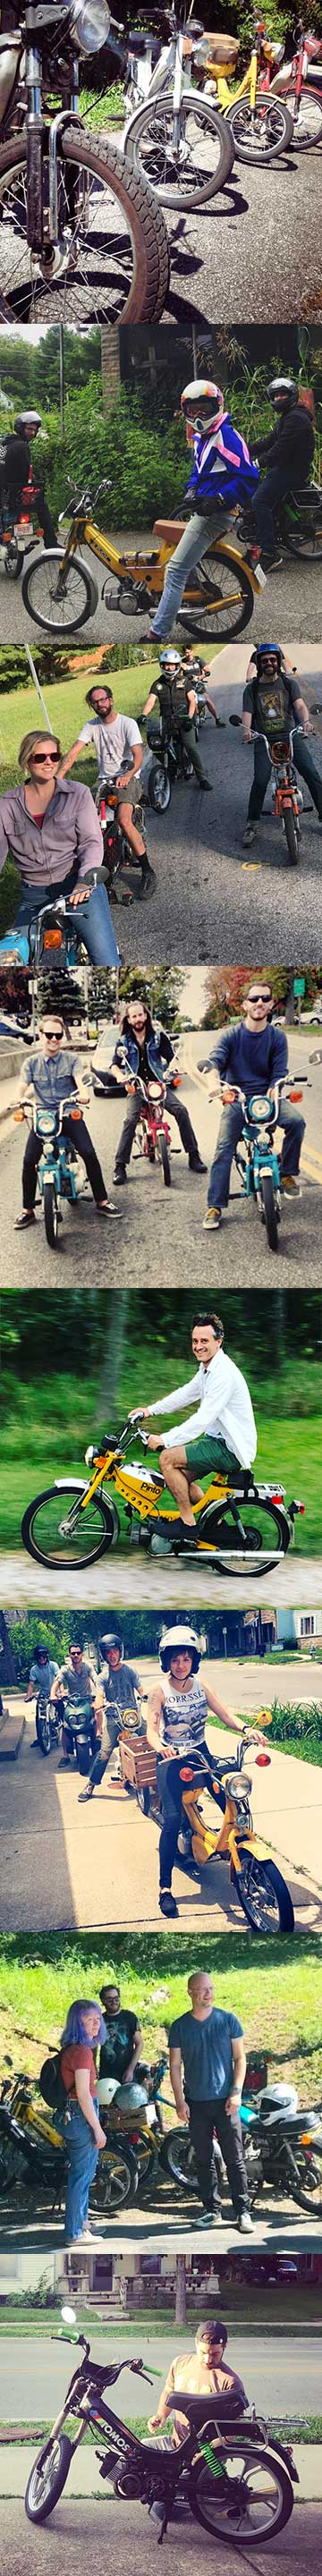 collage of moped photos